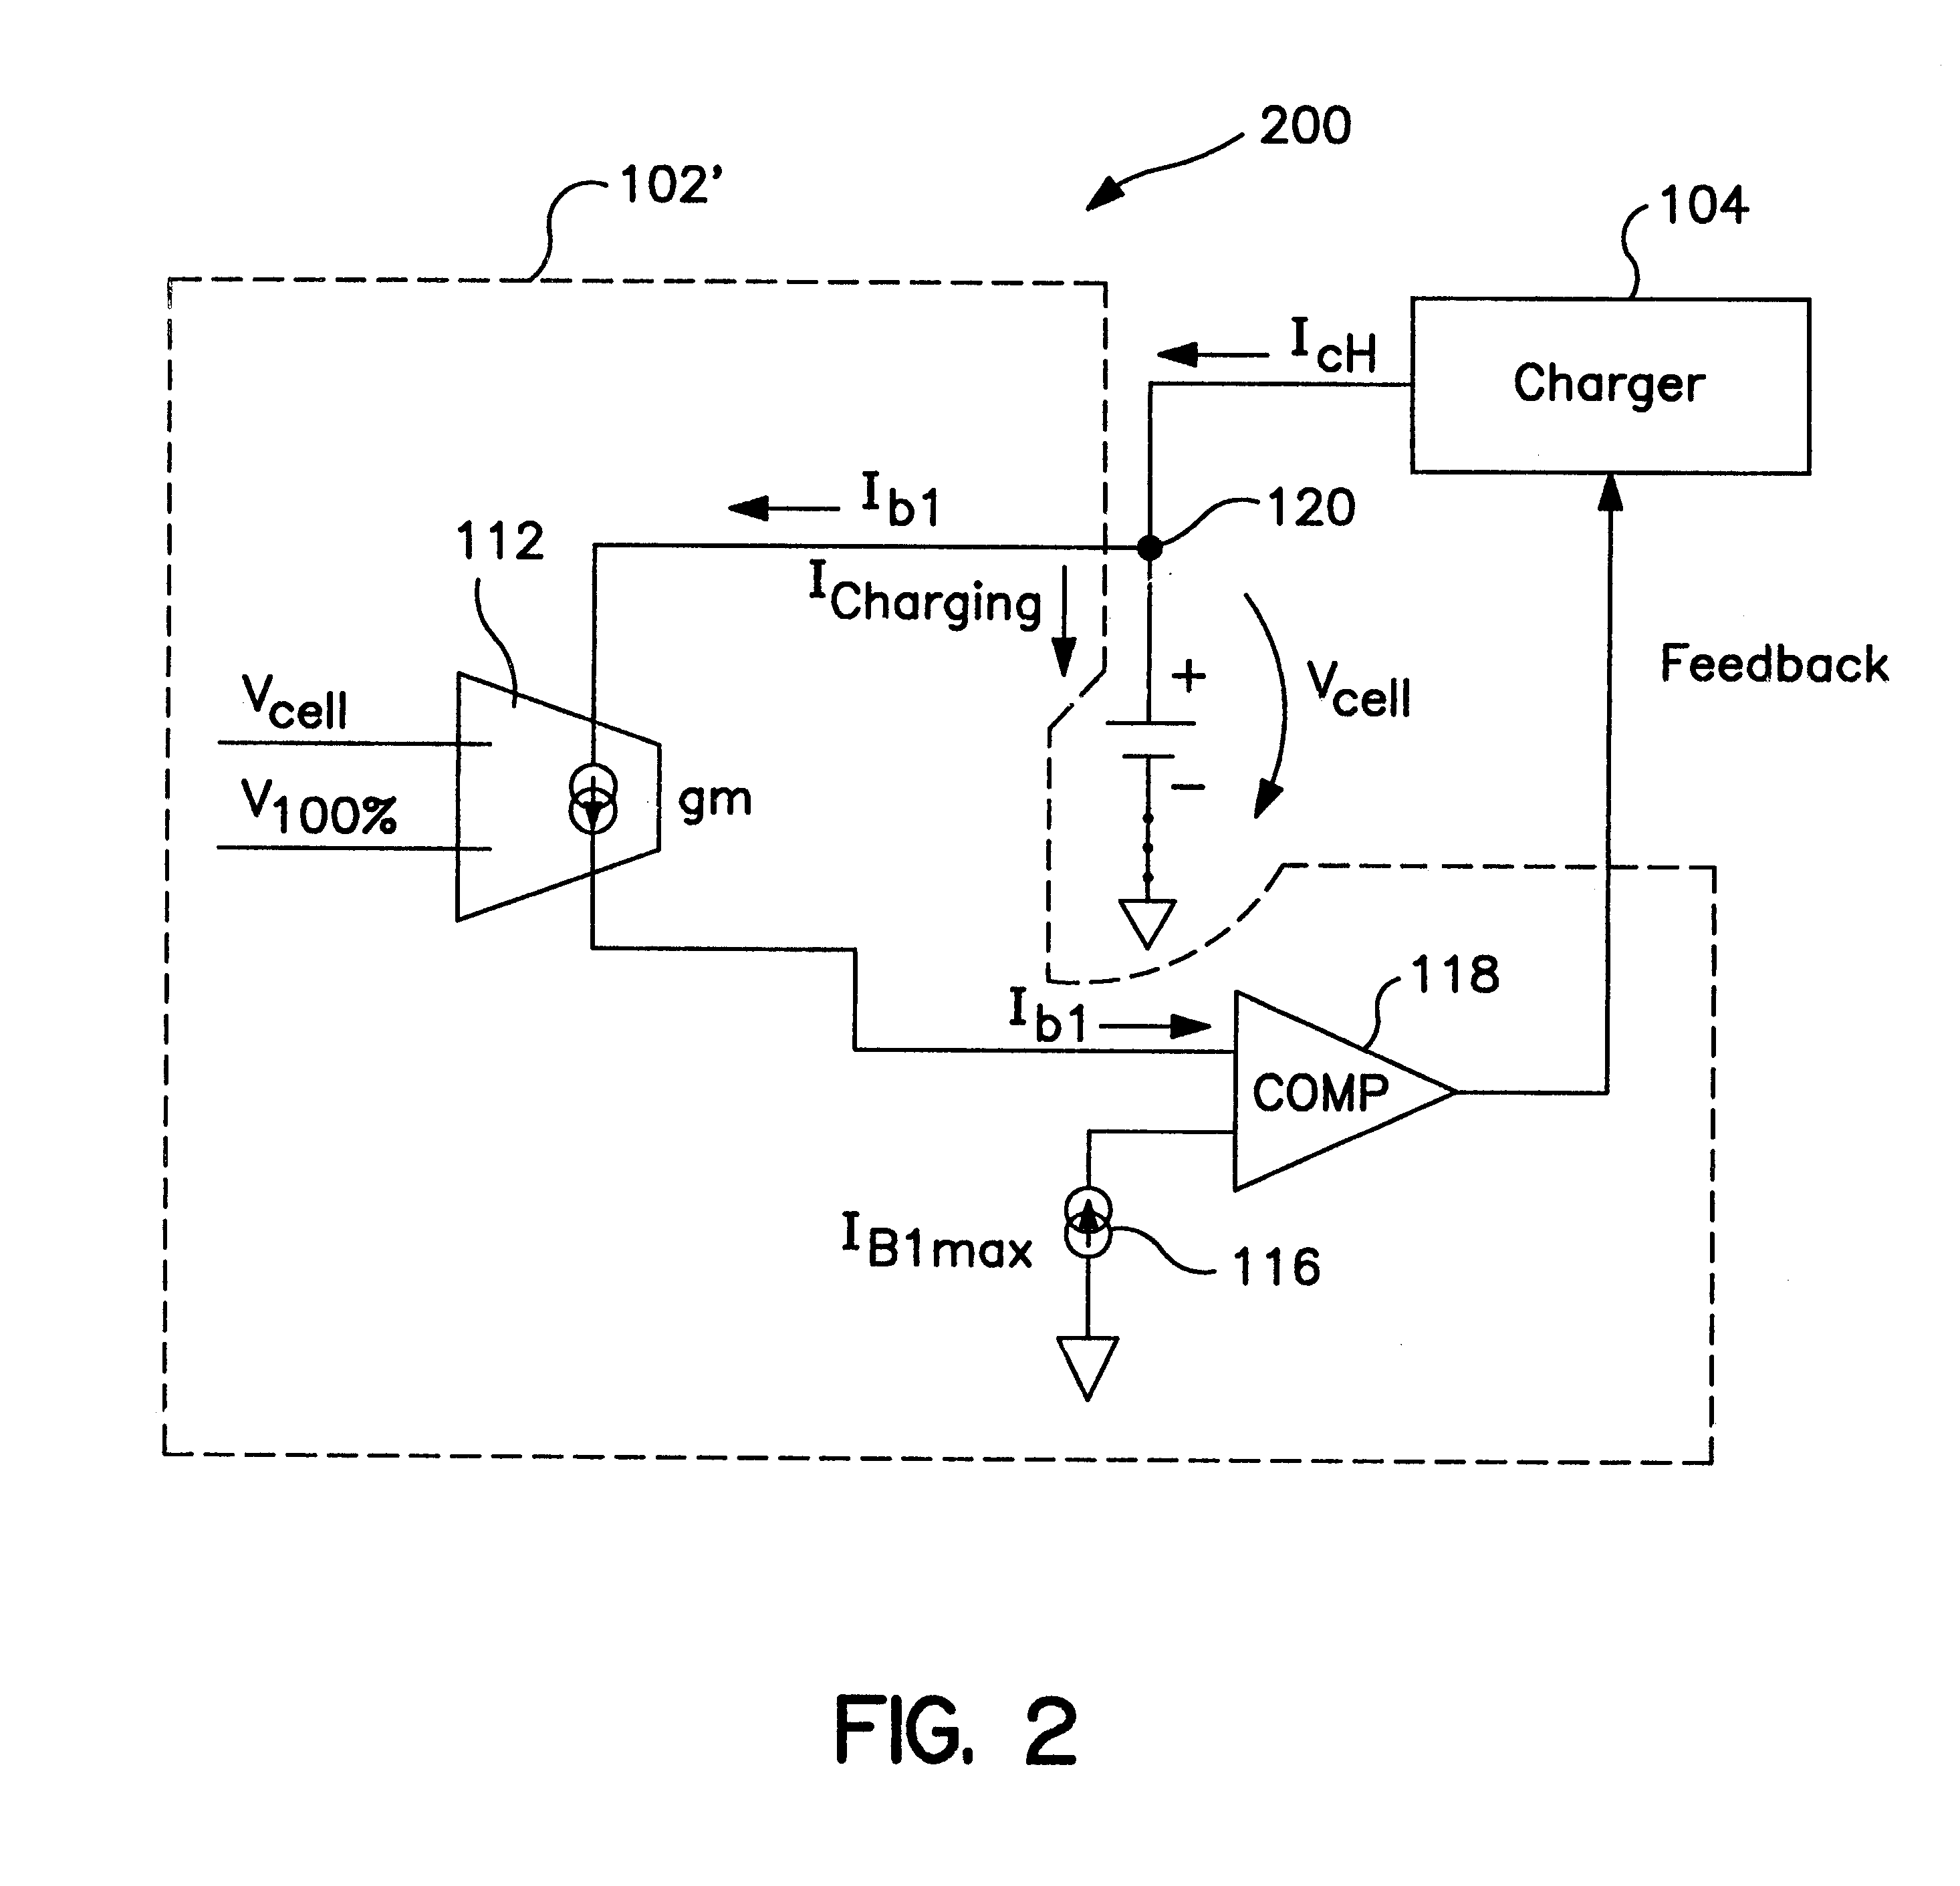 Battery cell charging system having voltage threshold and bleeder current generating circuits